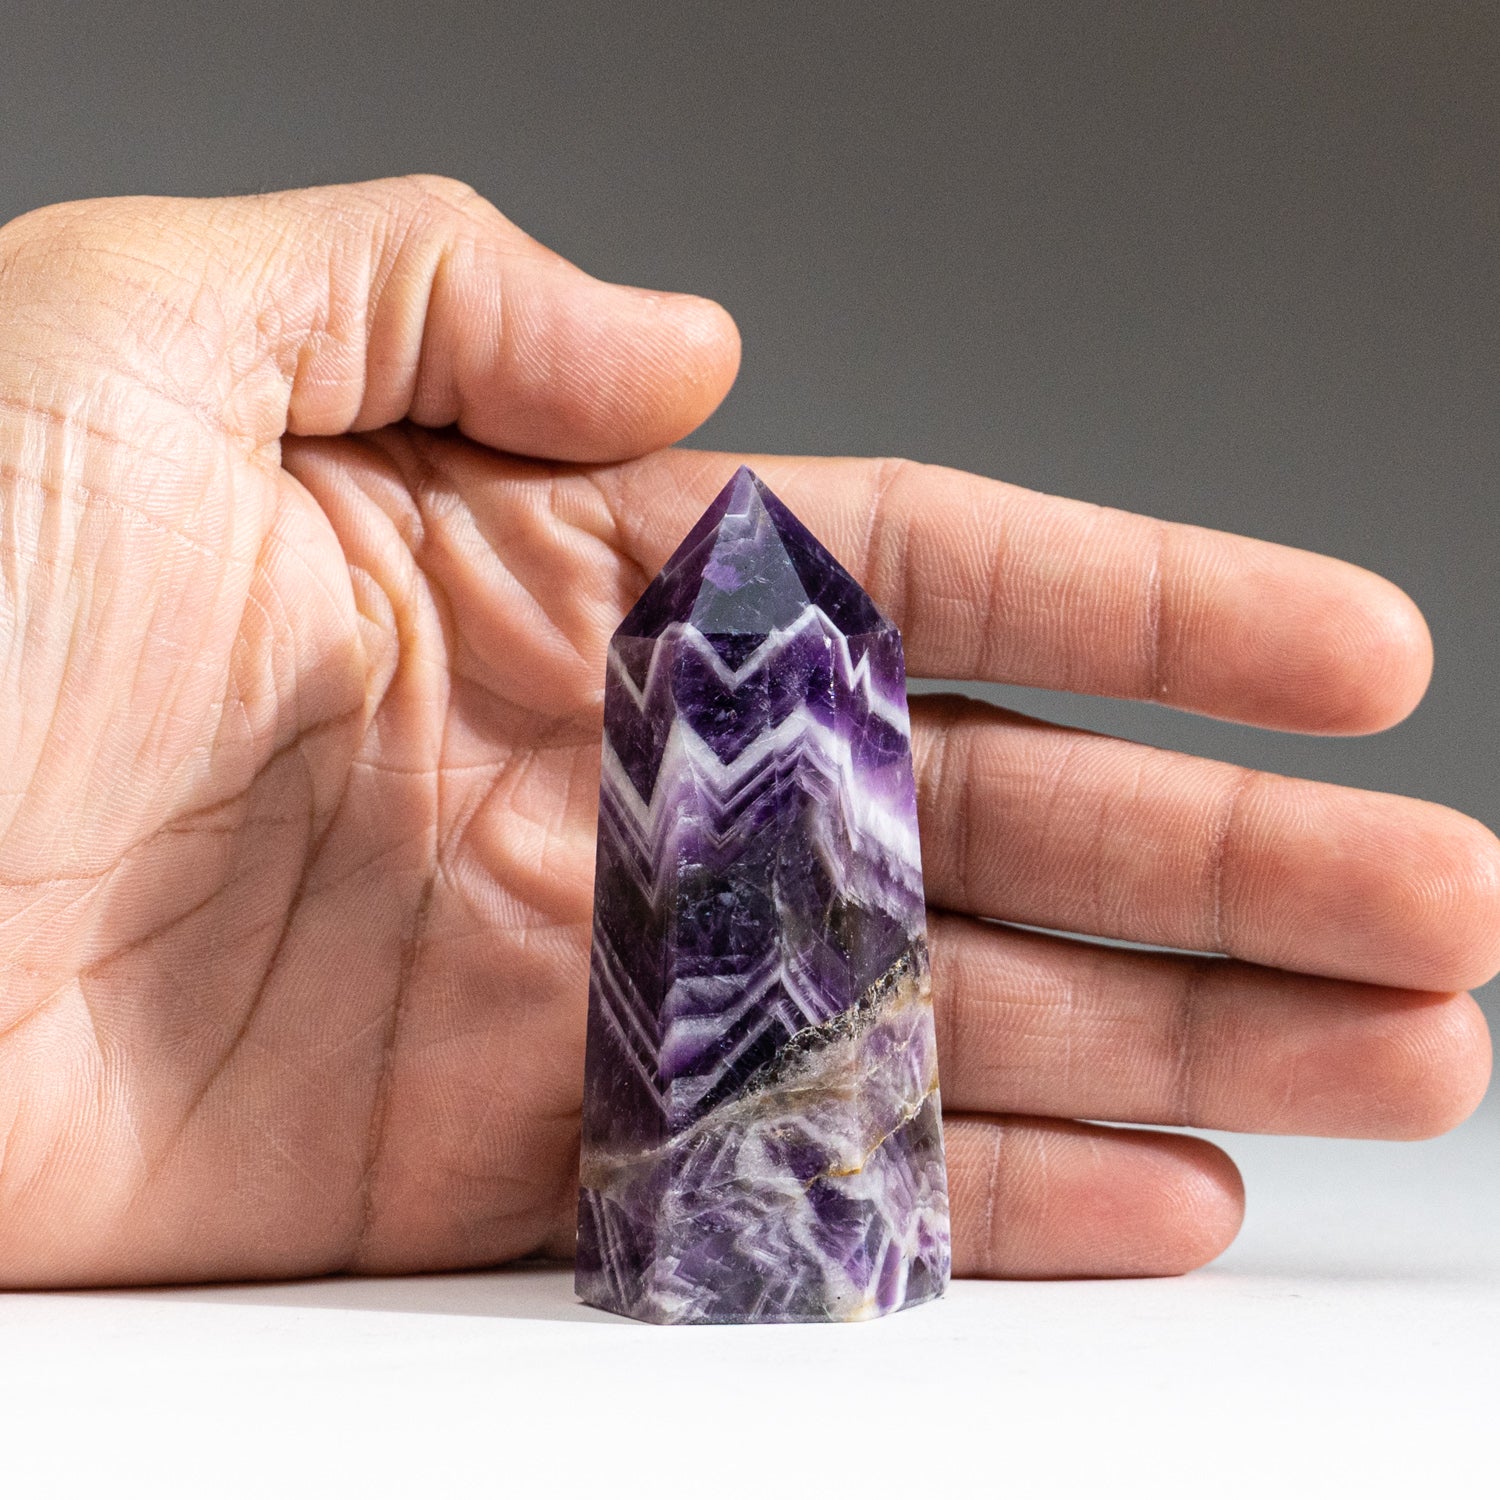 Polished Chevron Amethyst Point from Brazil (113.6 grams)